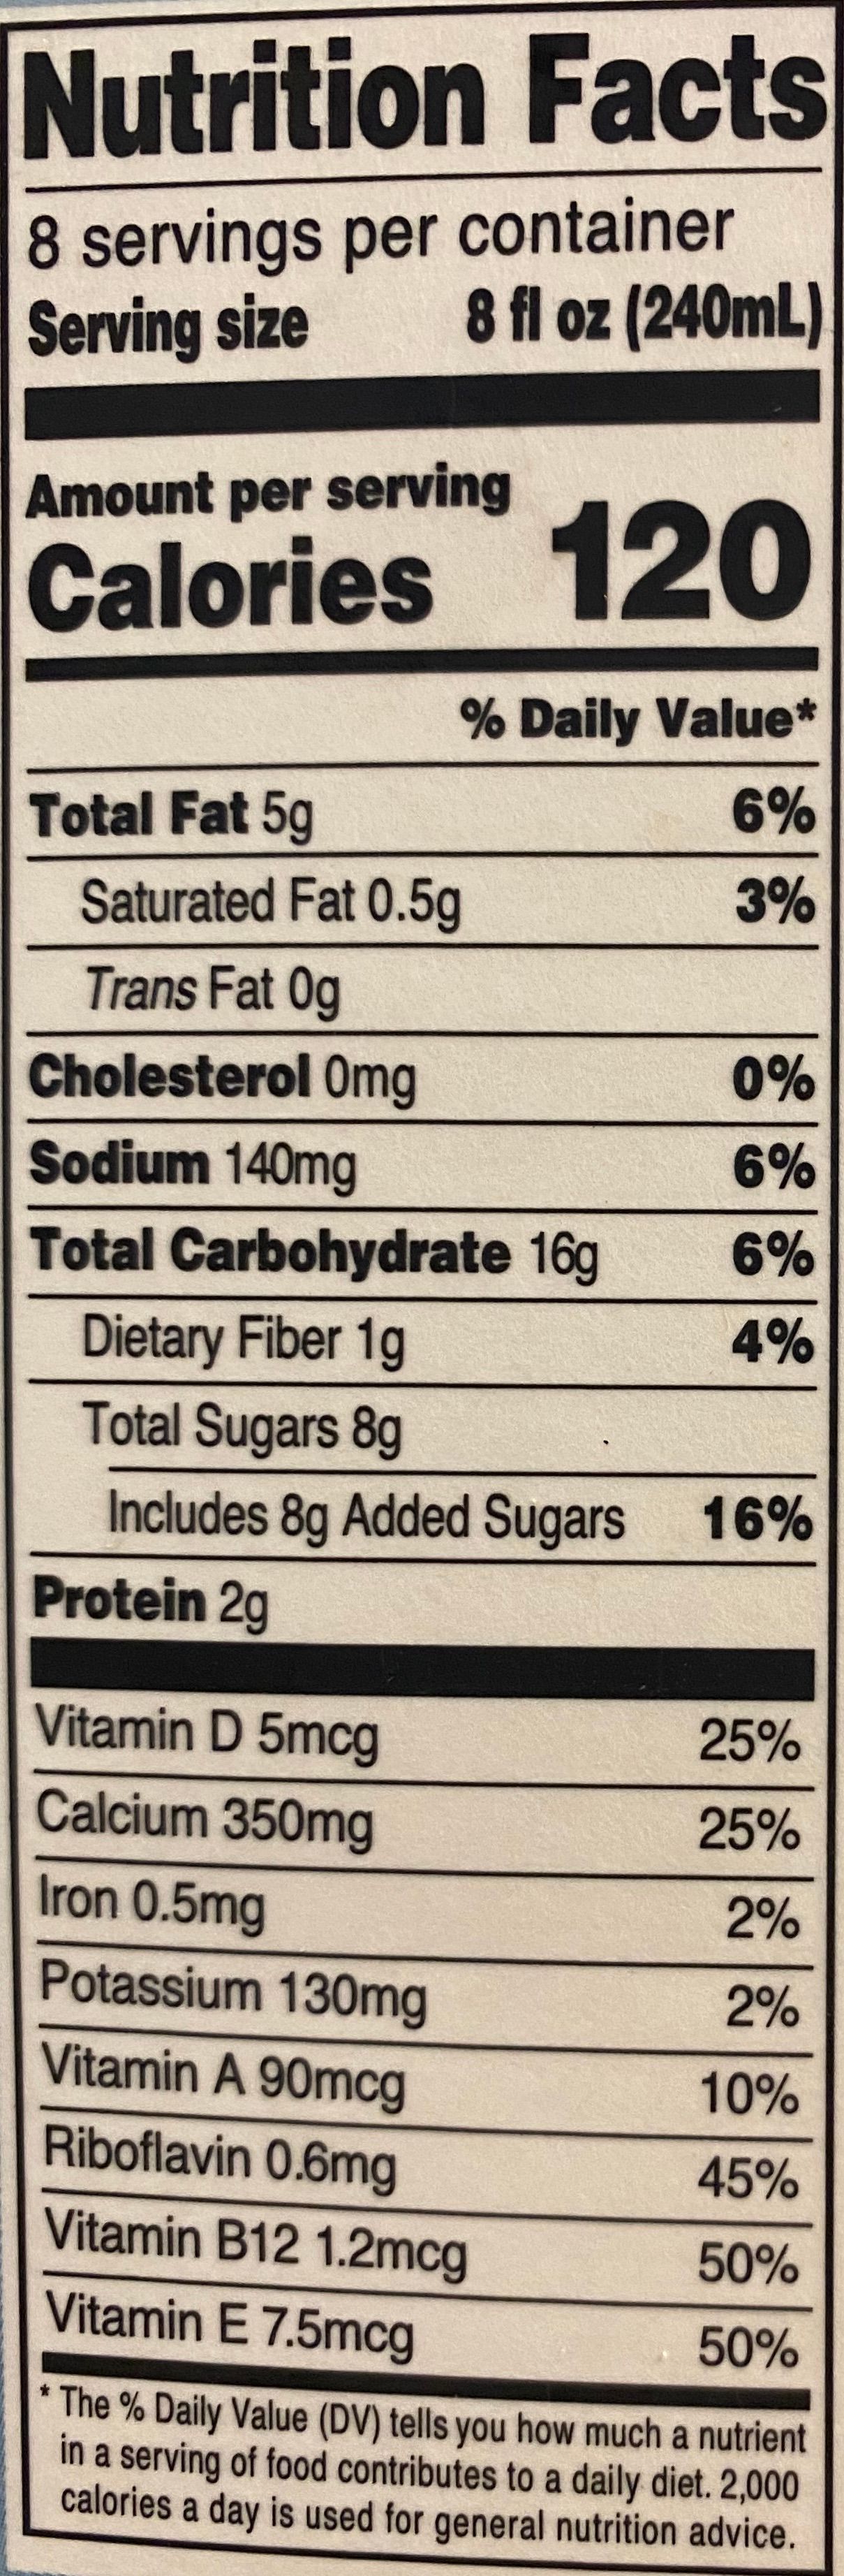 Nutrition Facts panel for oat milk